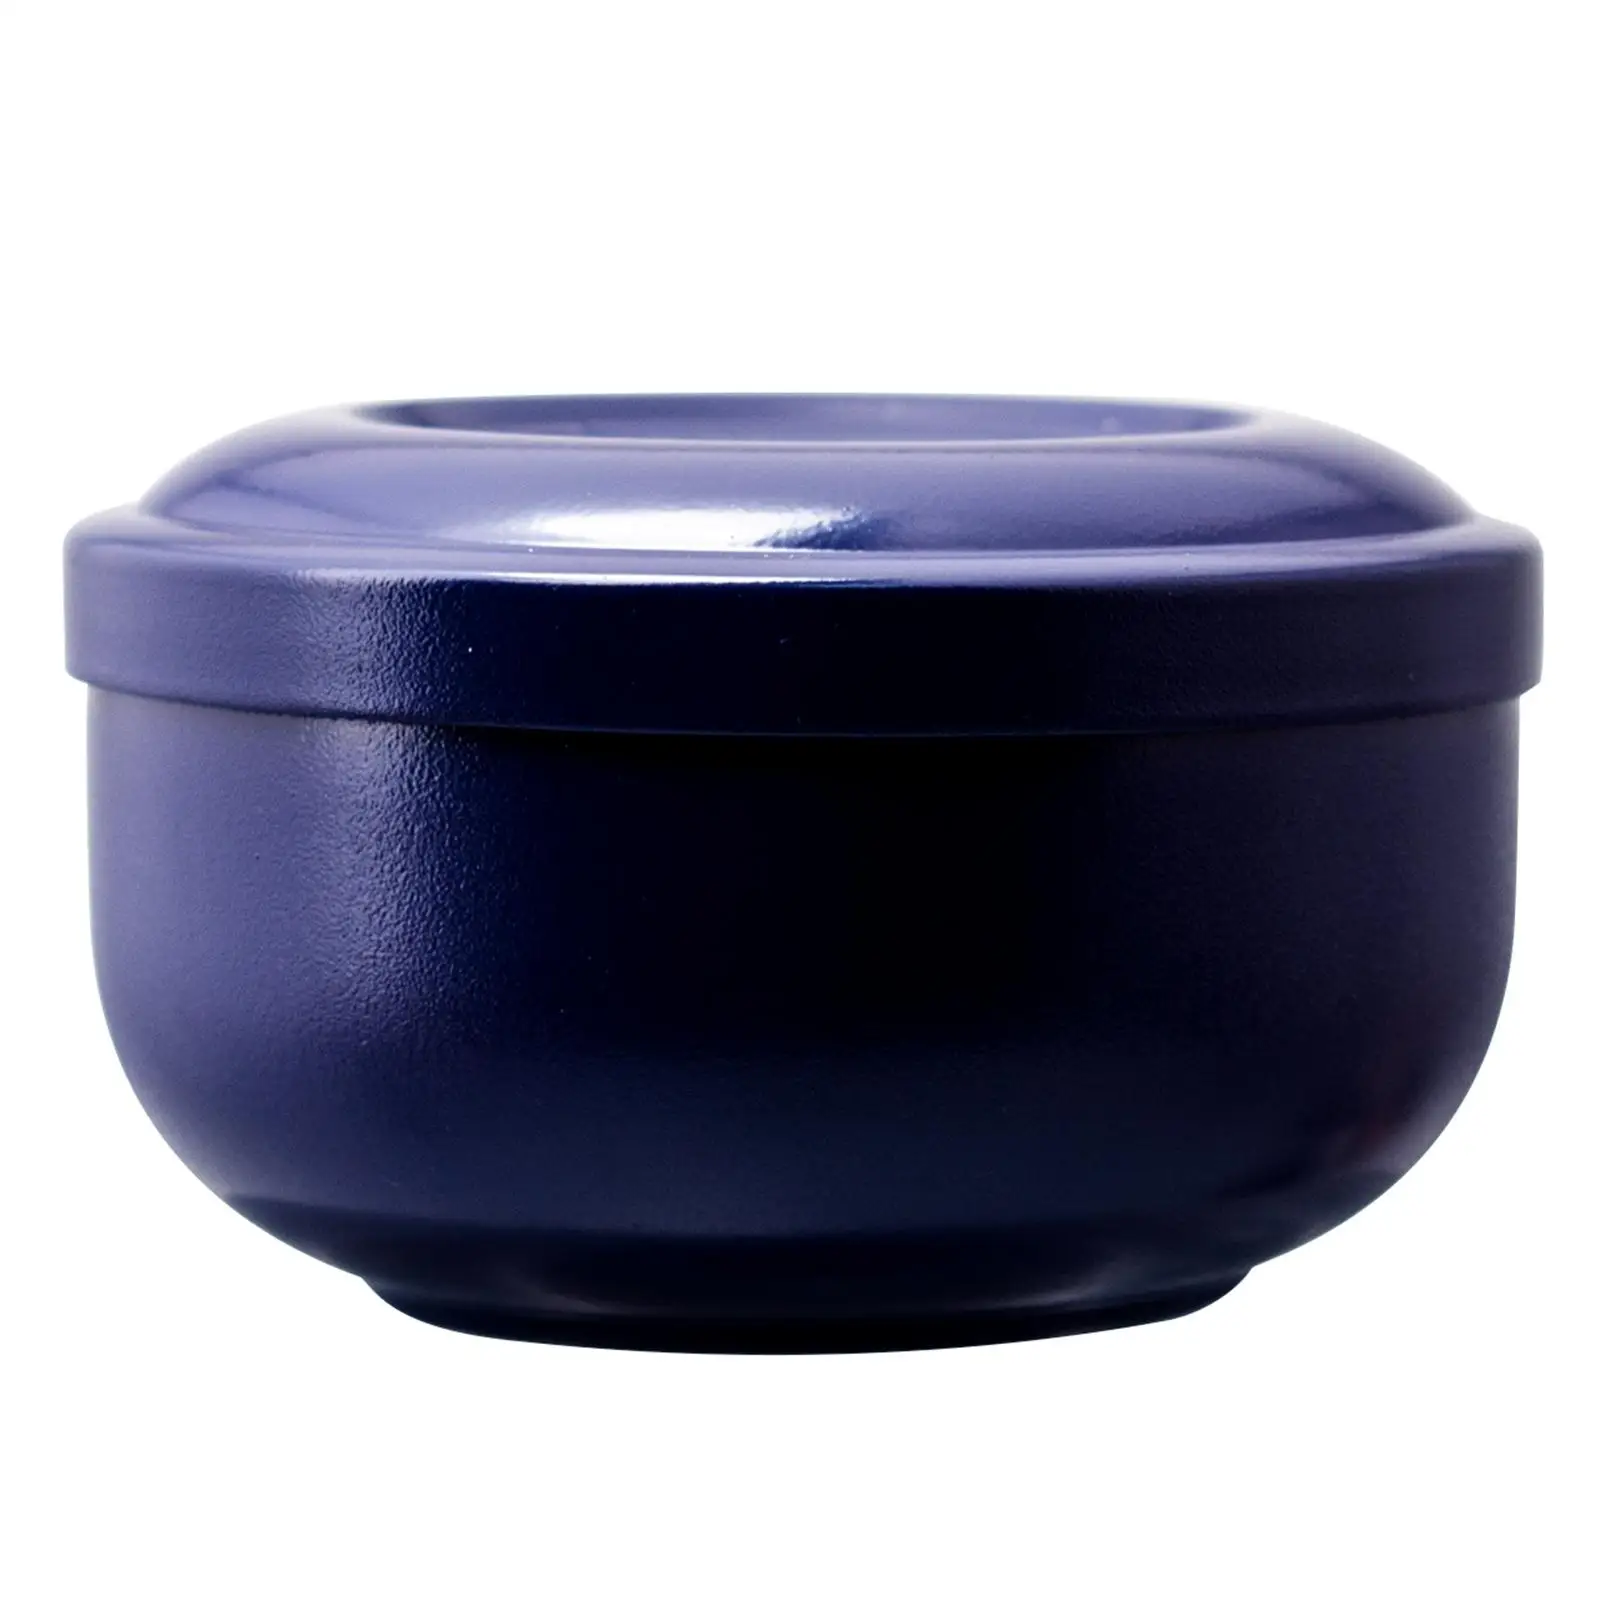 Shaving Soap Bowl with Lid Easier to Lather Mixing Bowl Provides A Luxurious Shave Experience Shave Soap Cup for Grandfather Men